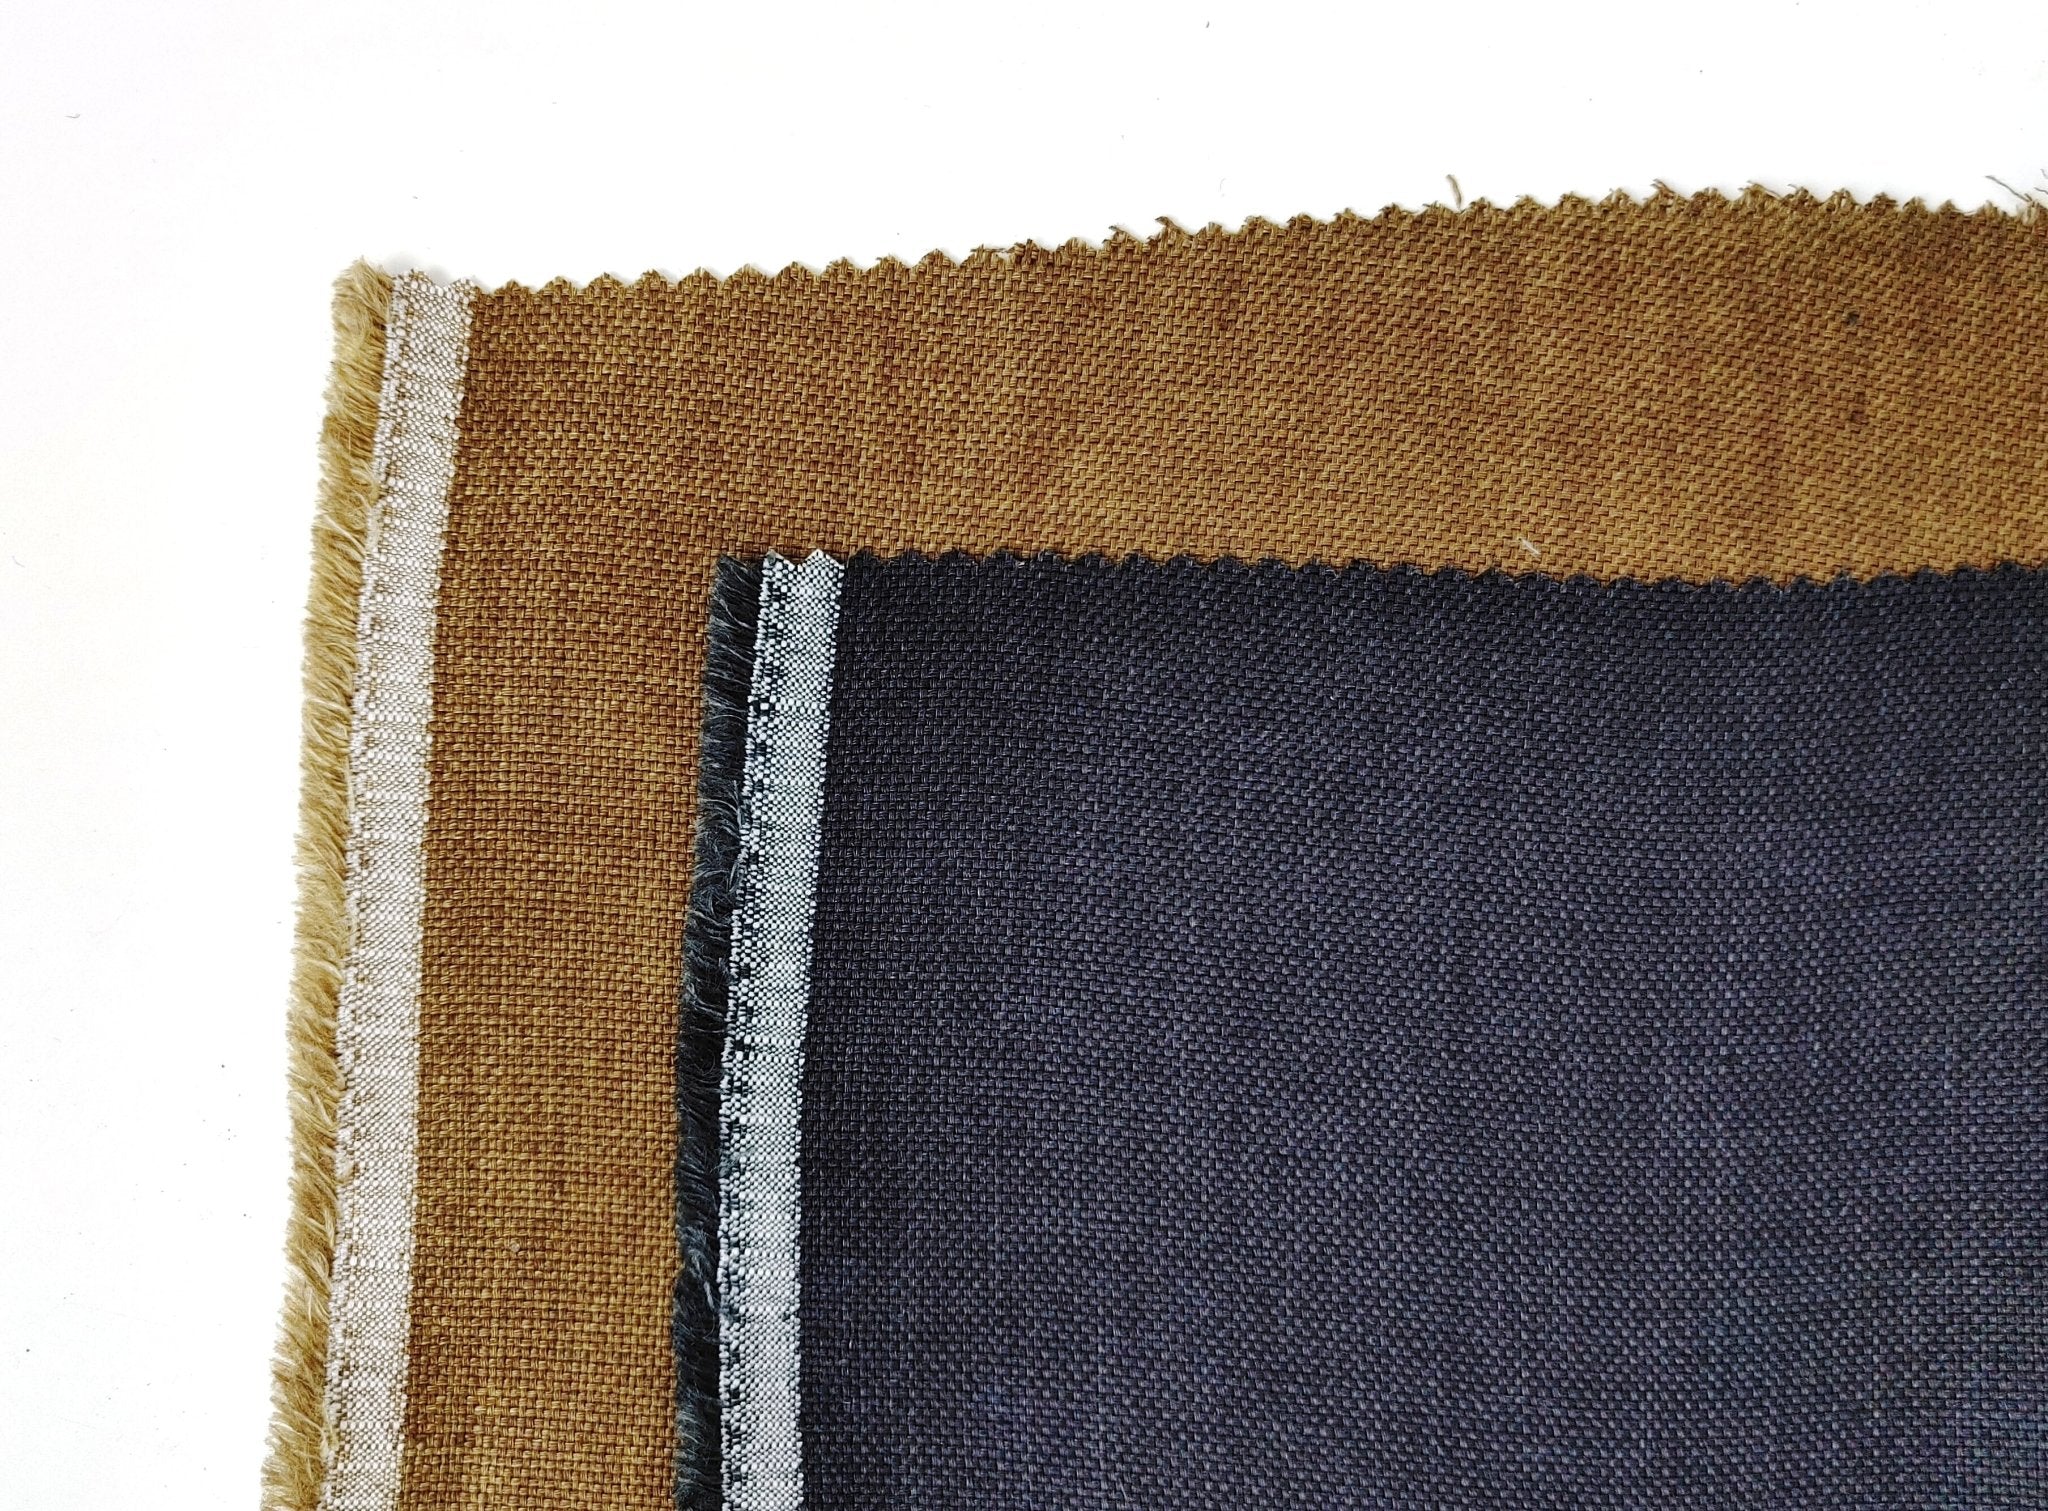 100% Linen Fabric 3:3 Mat Canvas with Vintage Dyed Delave Effect 7074 7075 - The Linen Lab - Brown